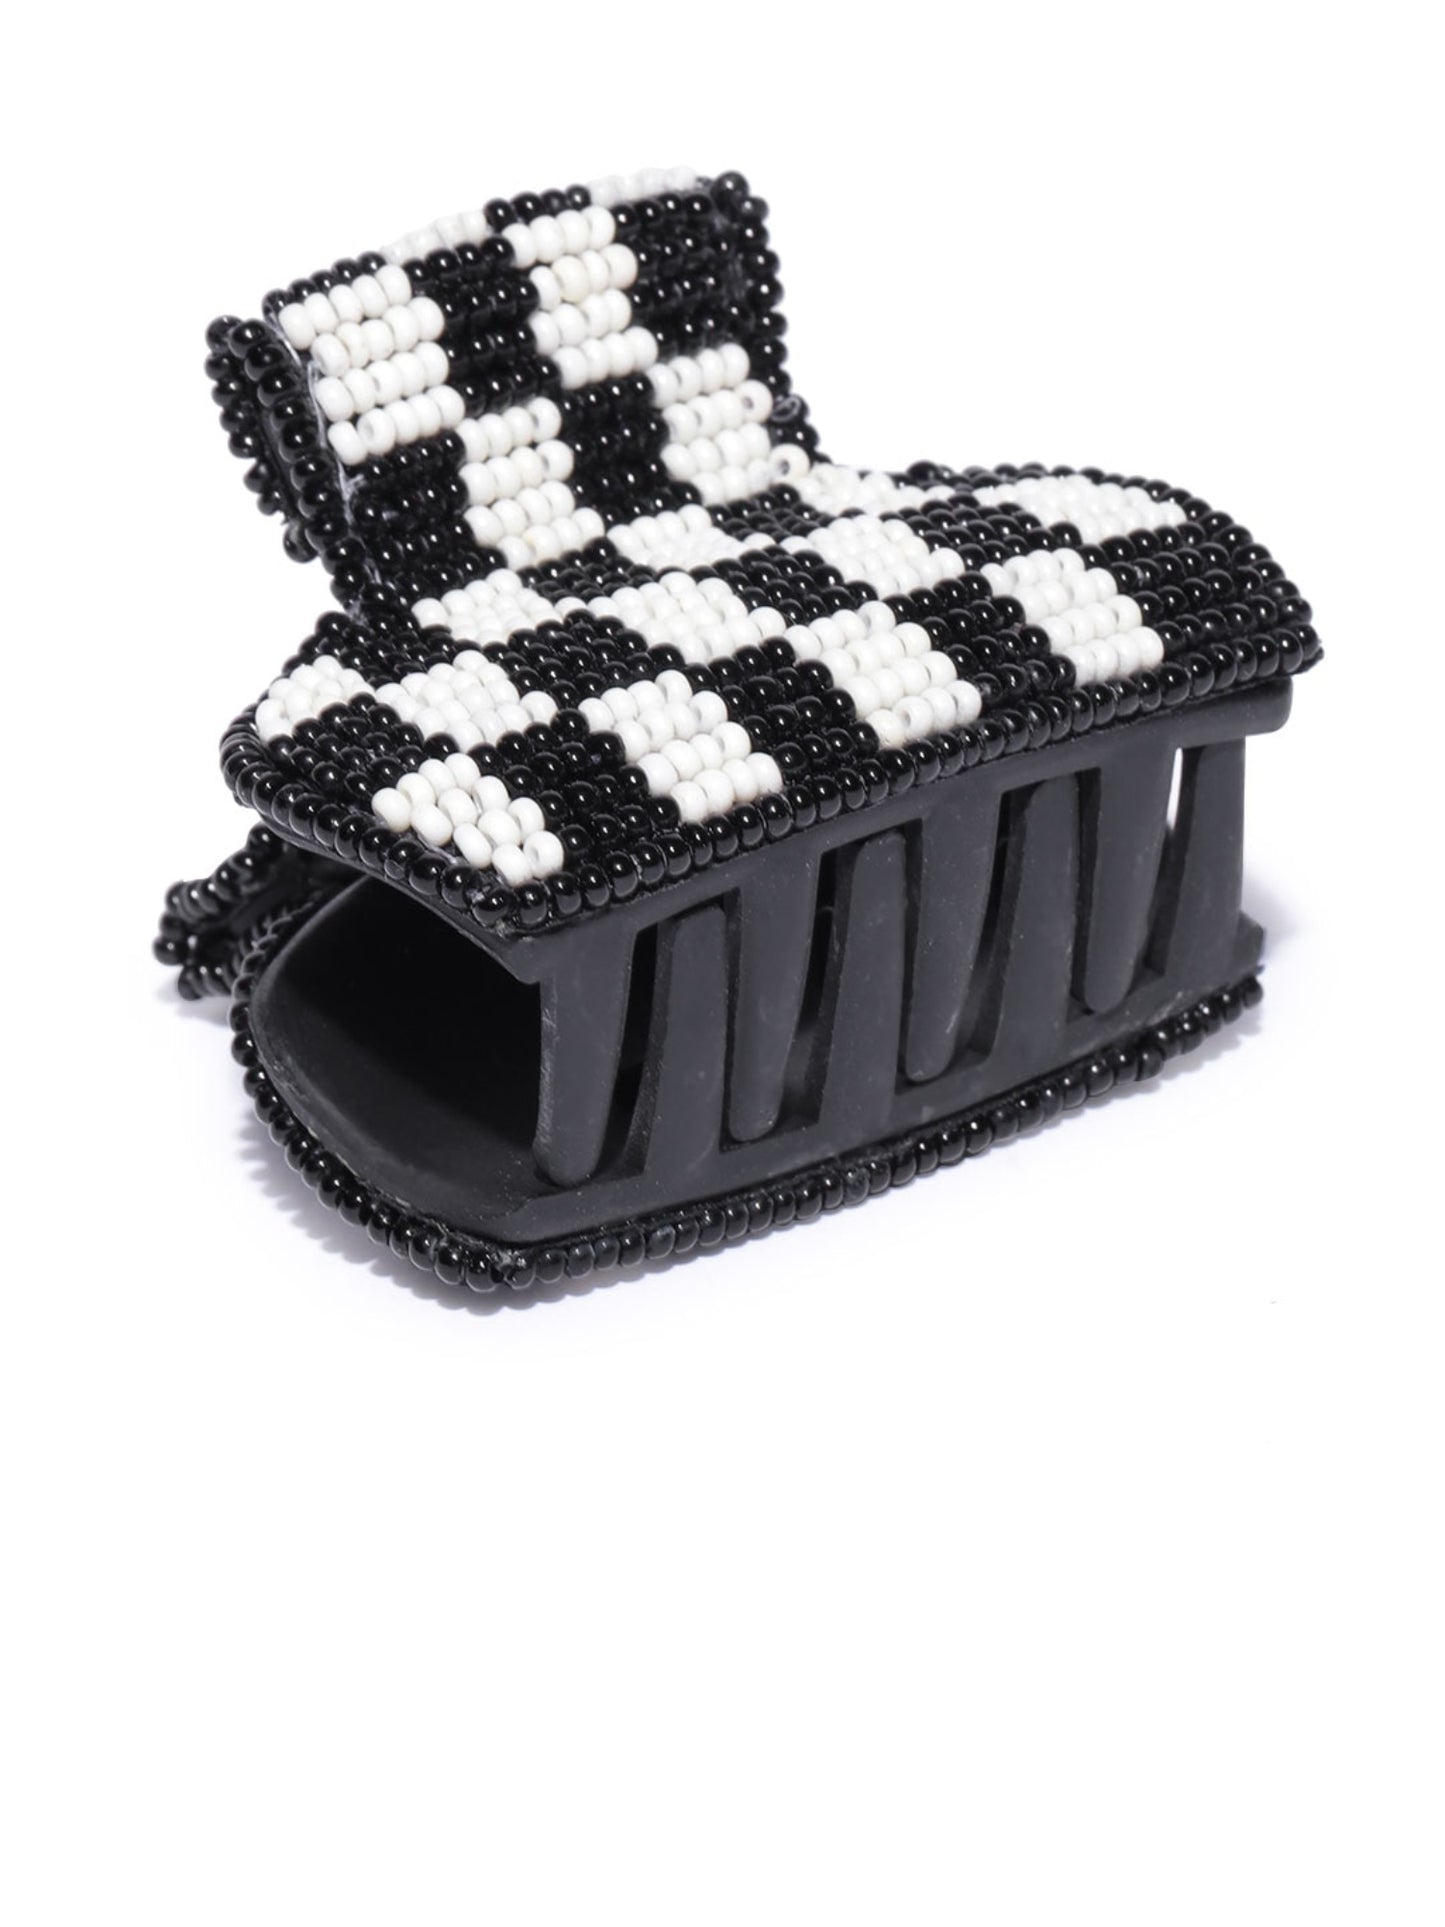 Blueberry Black and White bead embellished hair clutches